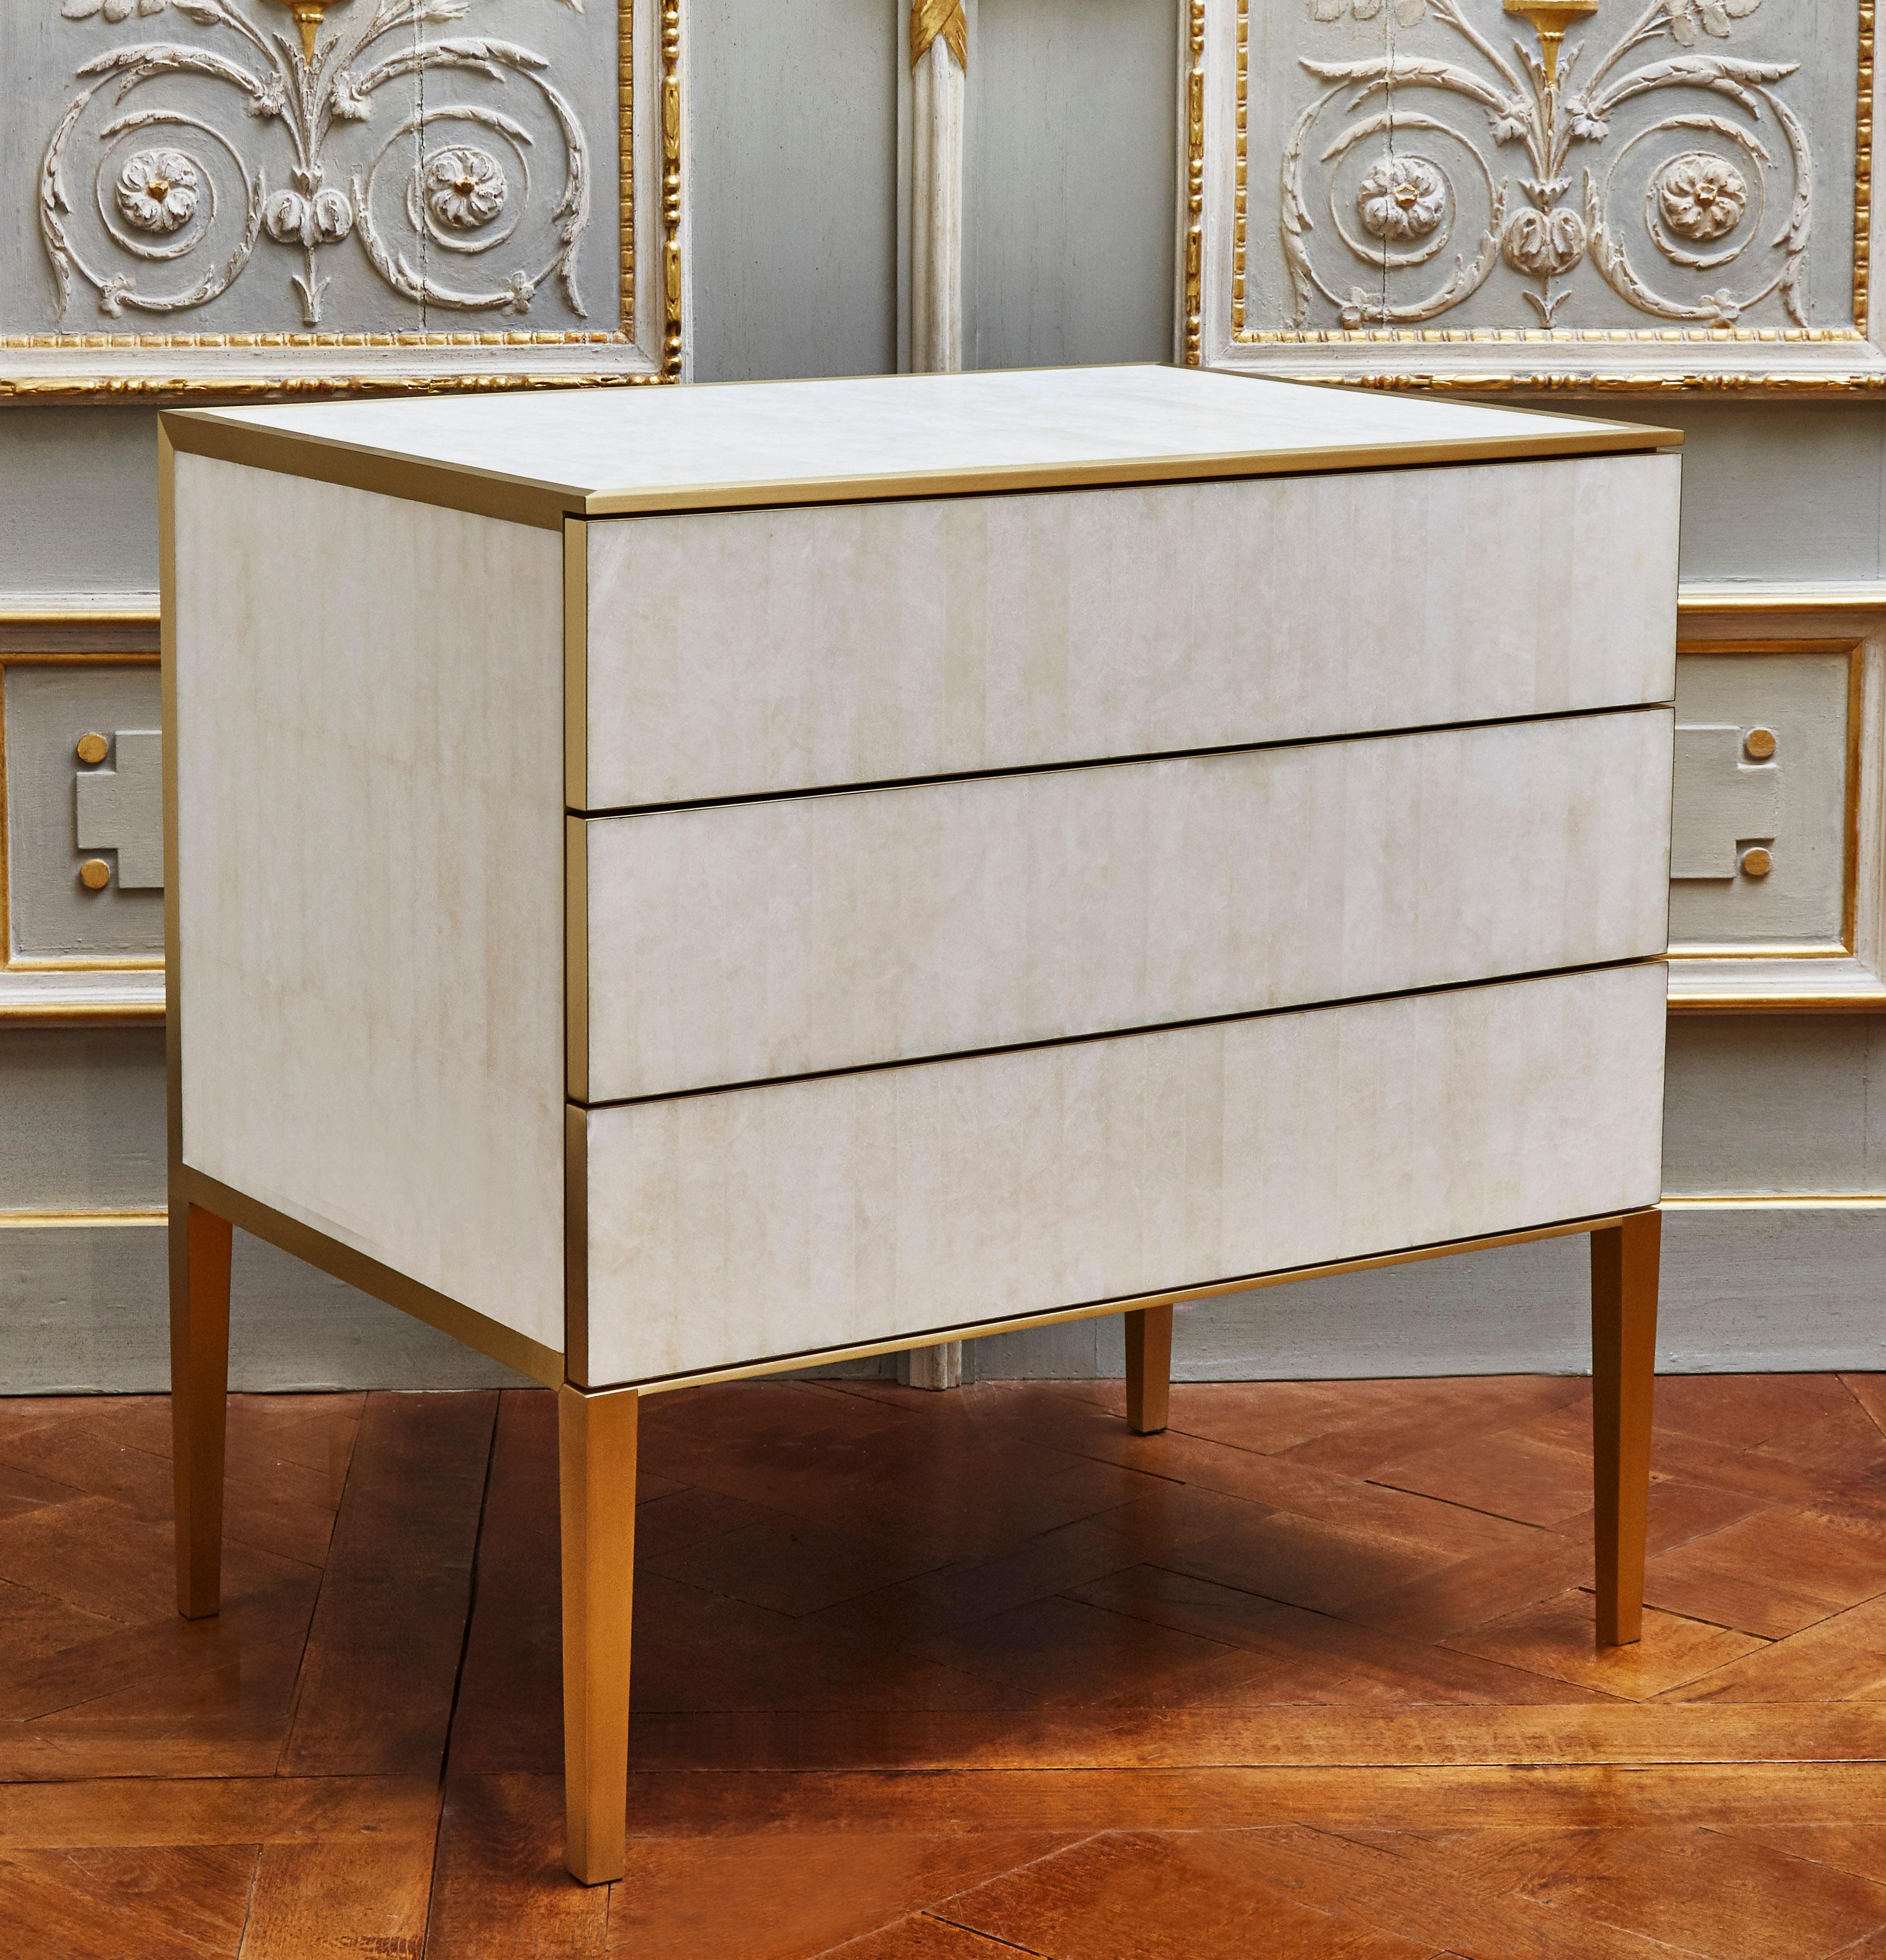 This dresser features three drawers, and is entirely inlaid with unpolished rock crystal platelets. Feet and finishes are made of brass. A pair is available. Studio Glustin Creation 2019.